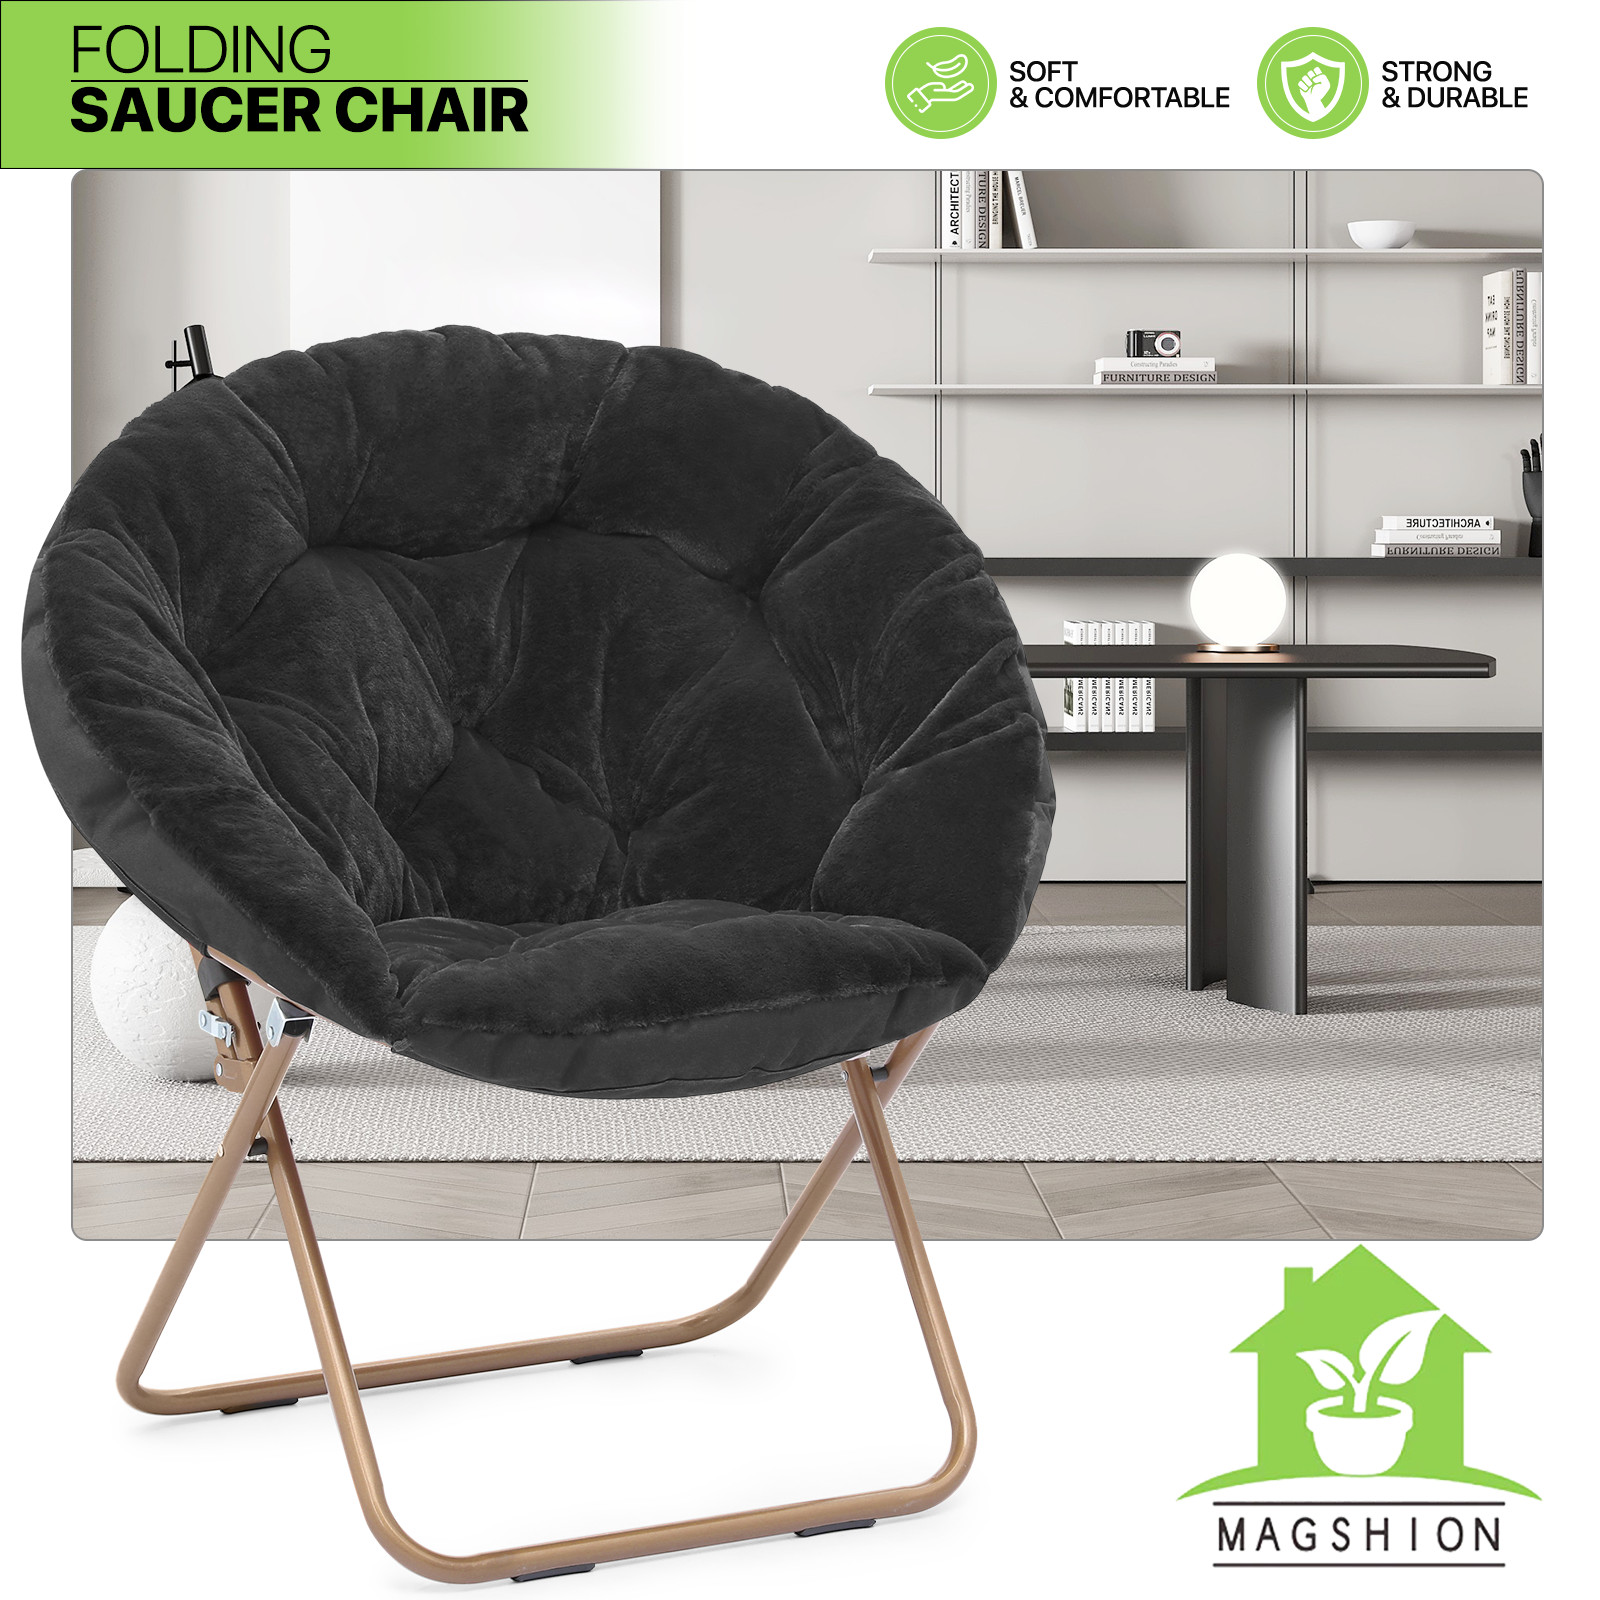 Magshion Saucer Chair Soft Faux Fur Folding Accent Chair, Lounge Lazy Chair Moon Chair Seat with Metal Frame for Bedroom Living Room, Black - image 2 of 10